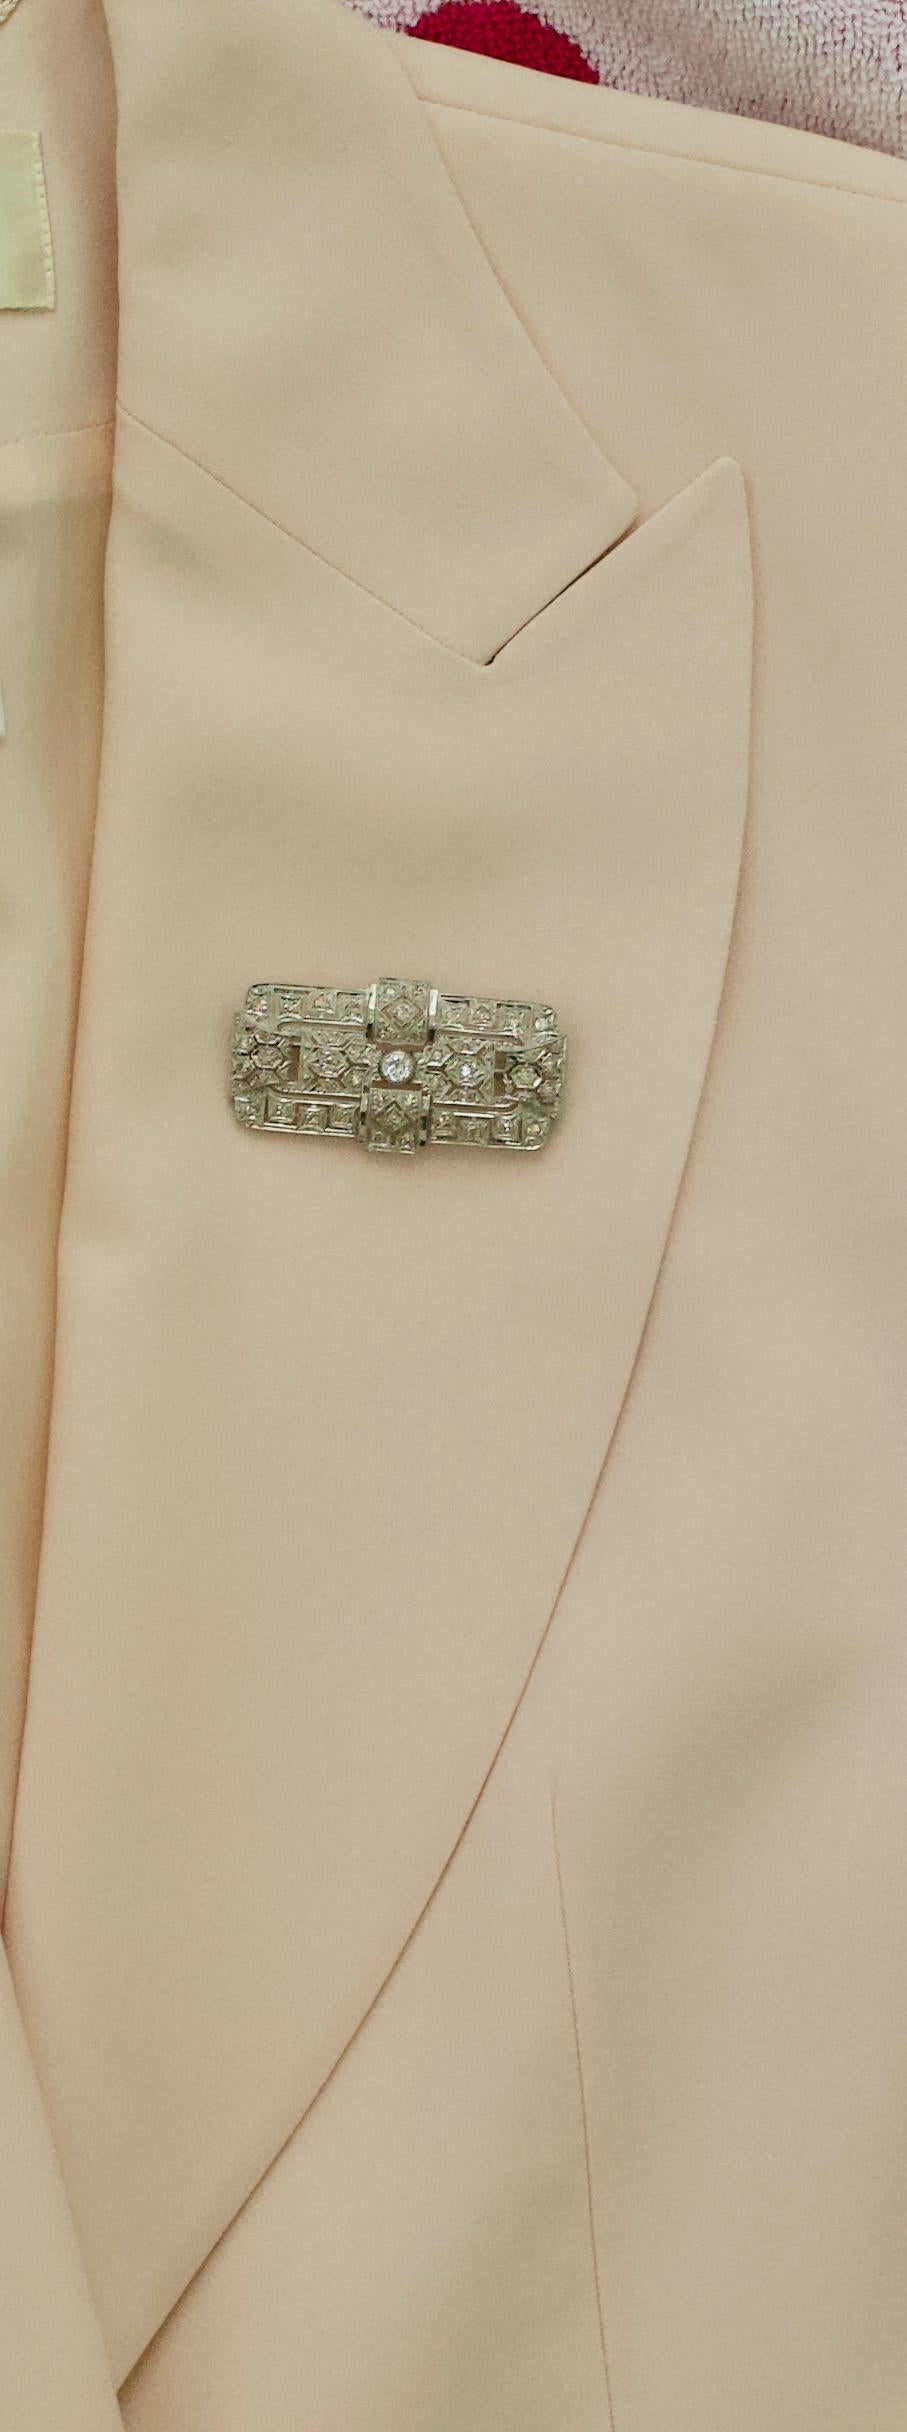 Art Deco Platinum Diamond Brooch Circa 1930's
Purchased From a Renowned Hollywood and Broadway Actors Family
One Round Brilliant Cut Diamond weighing .35 carats approximately  [GHI-SI]
Forty Six Round Brilliant Cut Diamonds weighing 1.65 carats